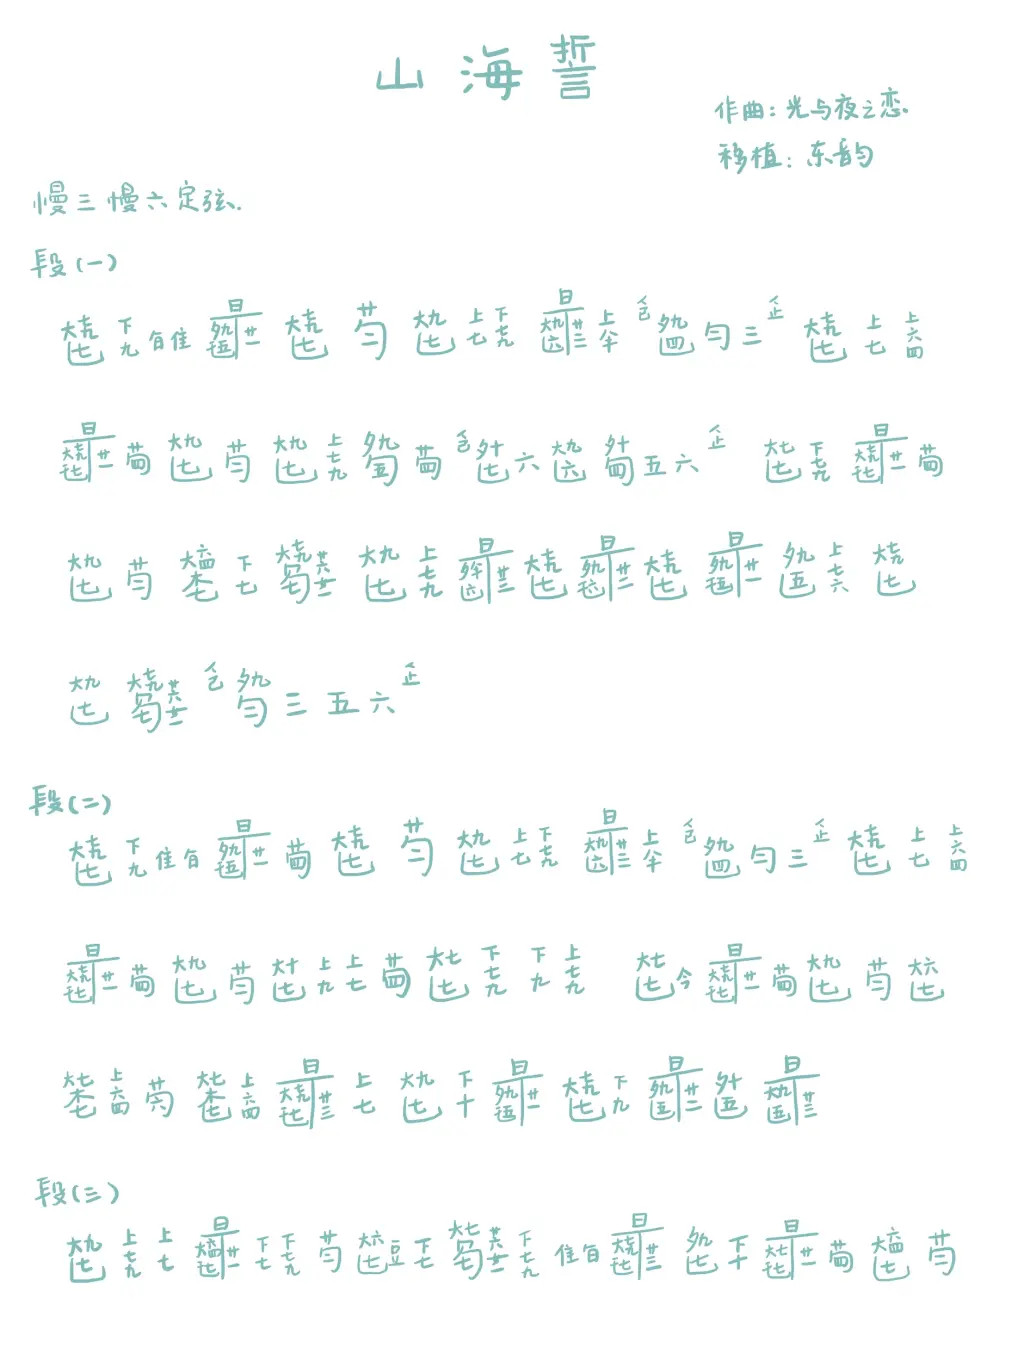 Vow of Mountain and Sea（guqin sheet music）